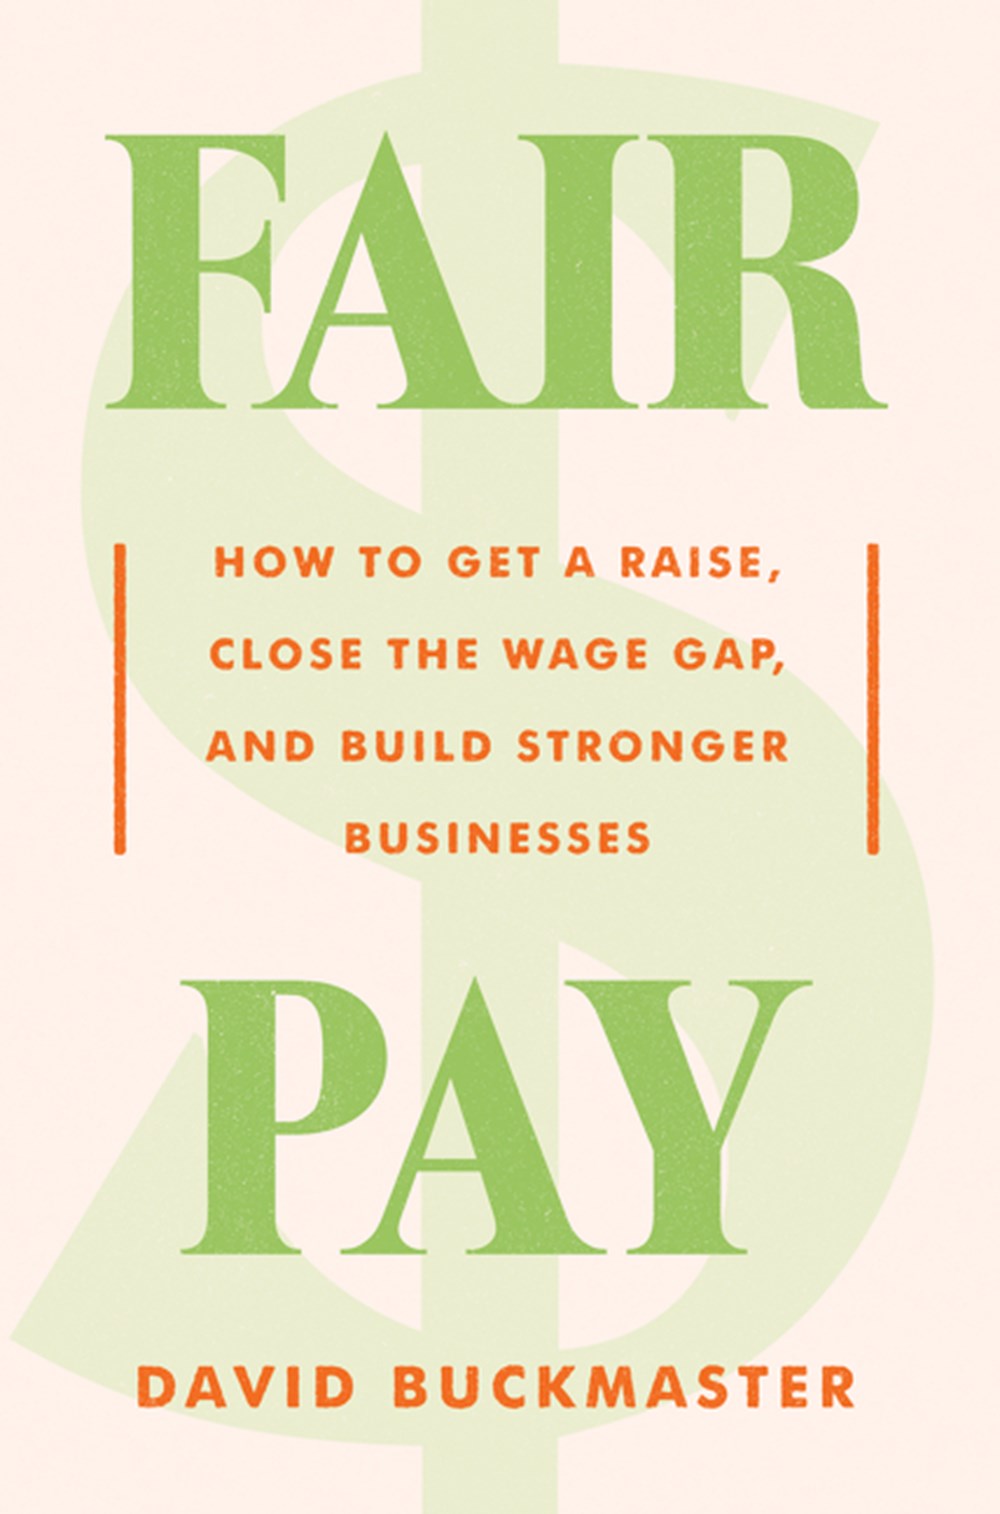 Fair Pay: How to Get a Raise, Close the Wage Gap, and Build Stronger Businesses